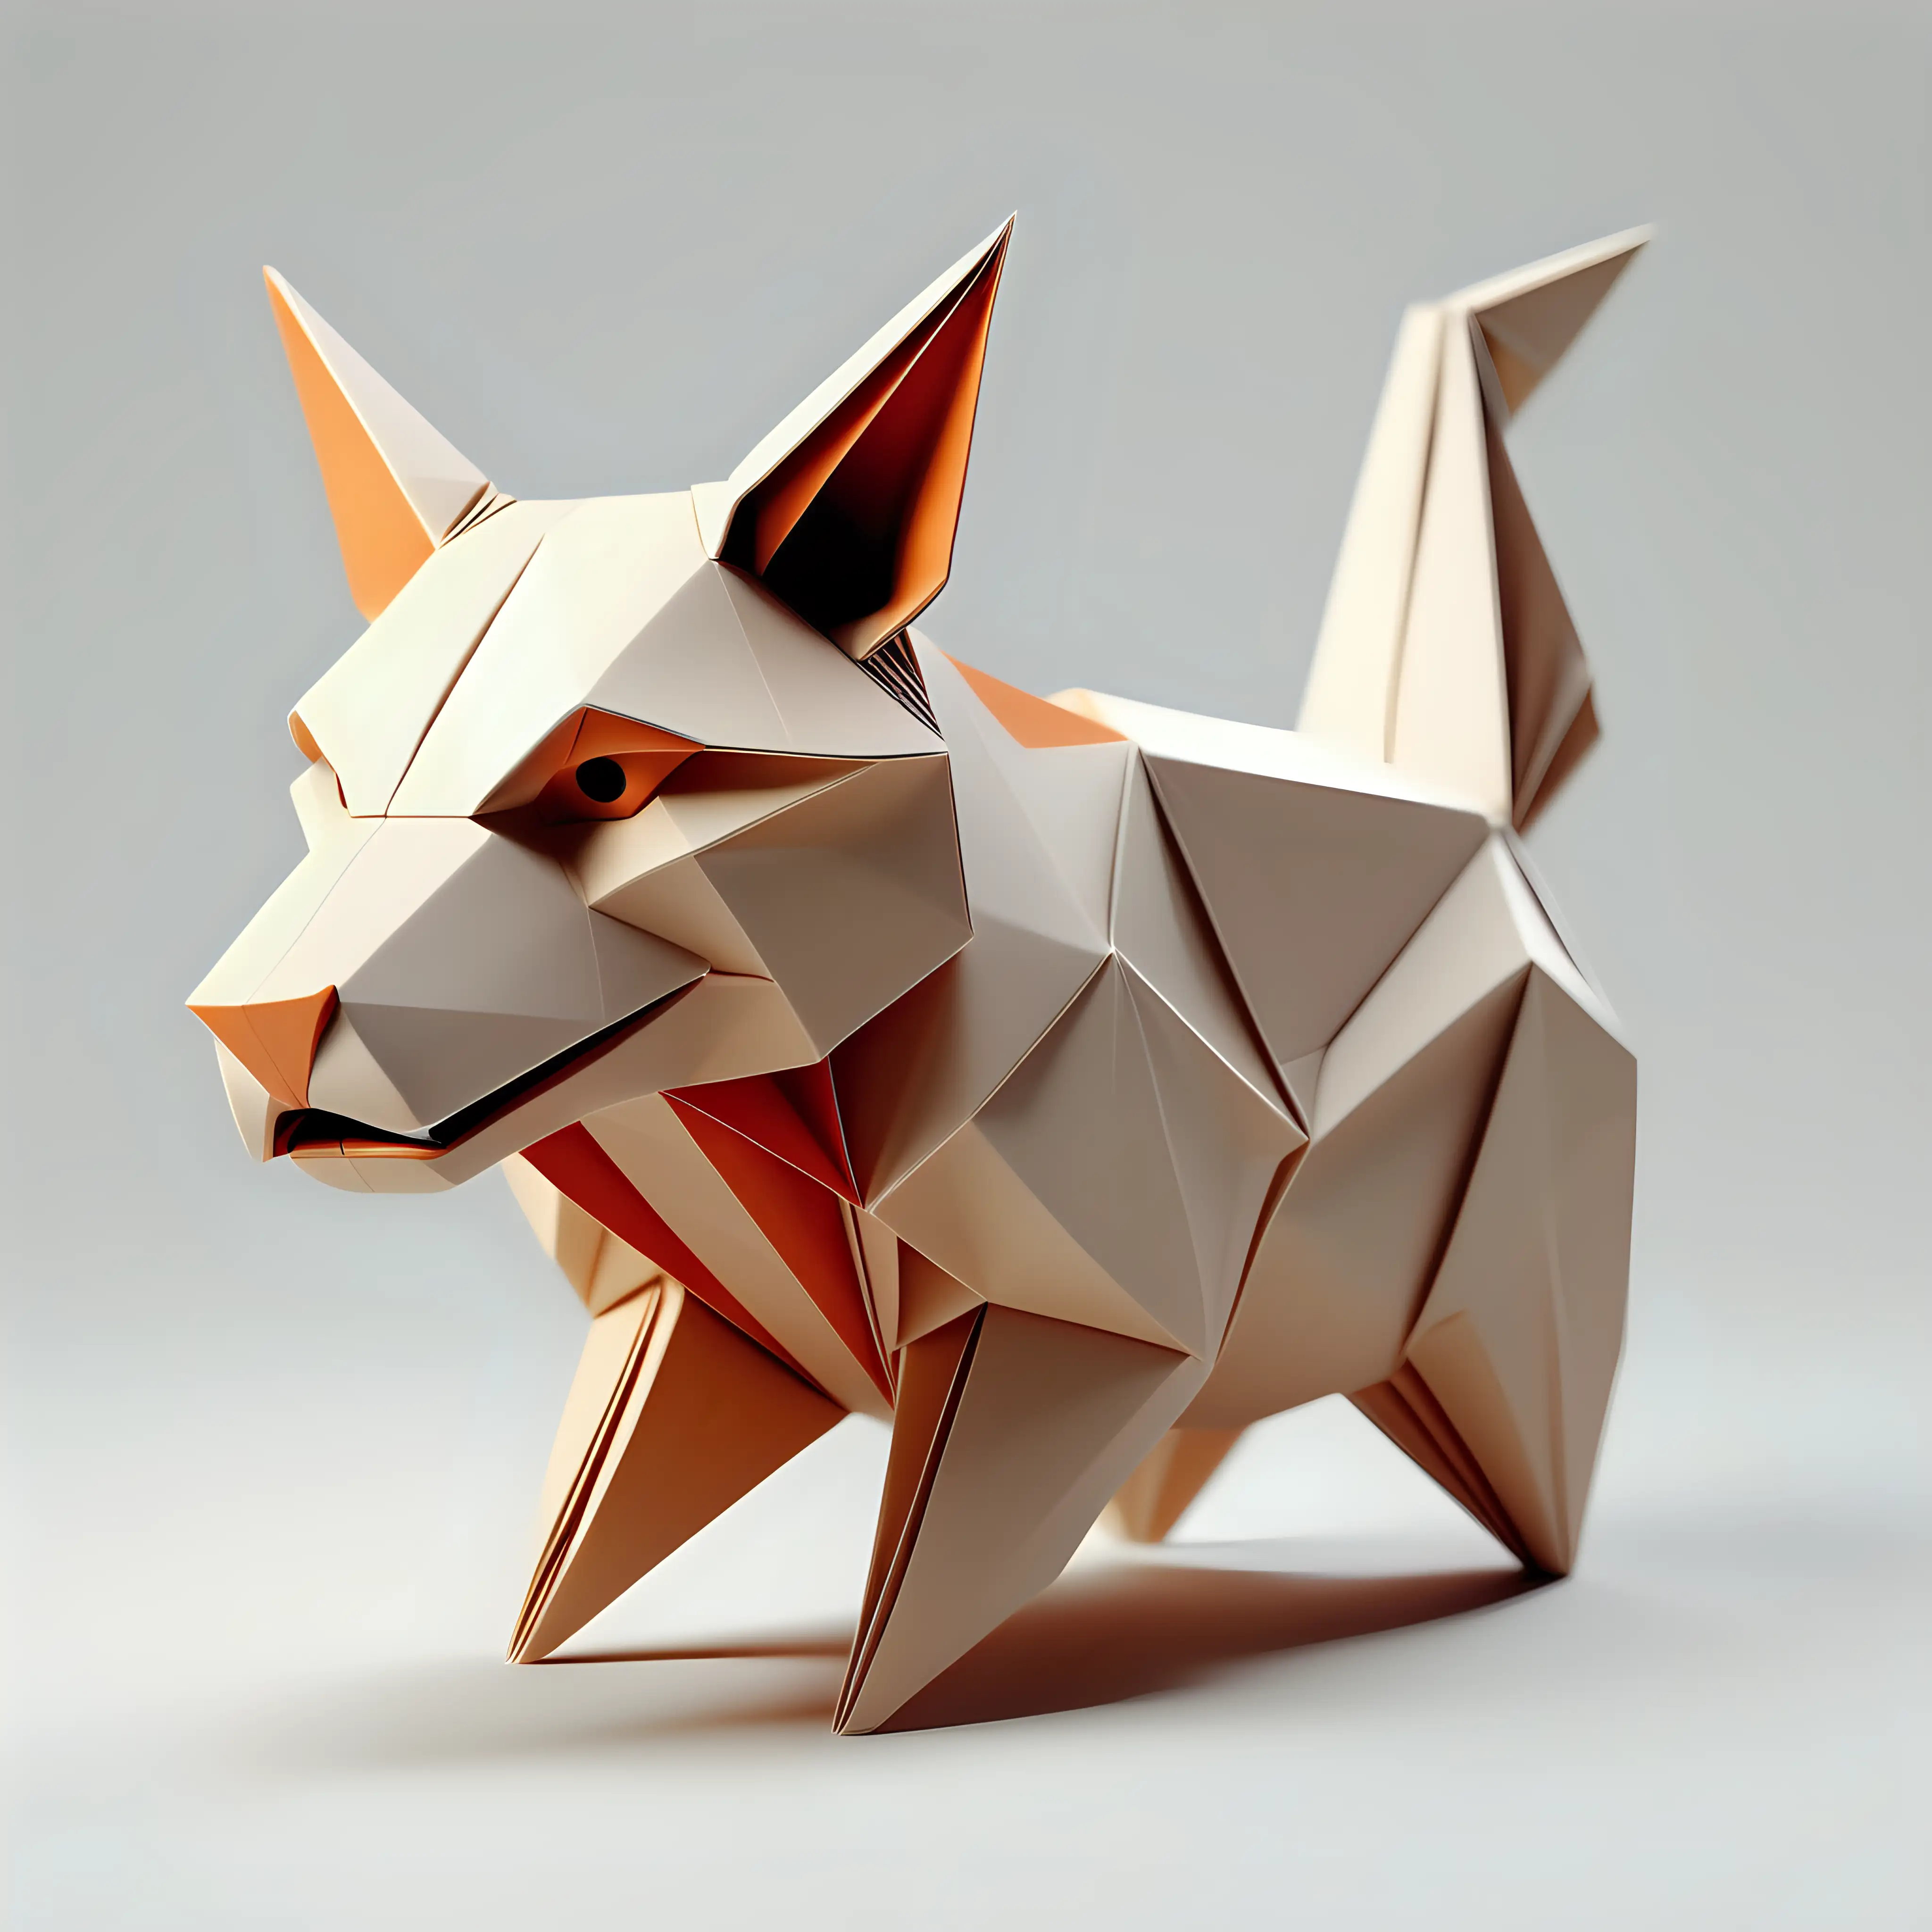 3D design that represent different animals or forms in a three-dimensional origami style. A minimalist yet impactful design that adds depth and style, sticker style, white background, ultra detailed